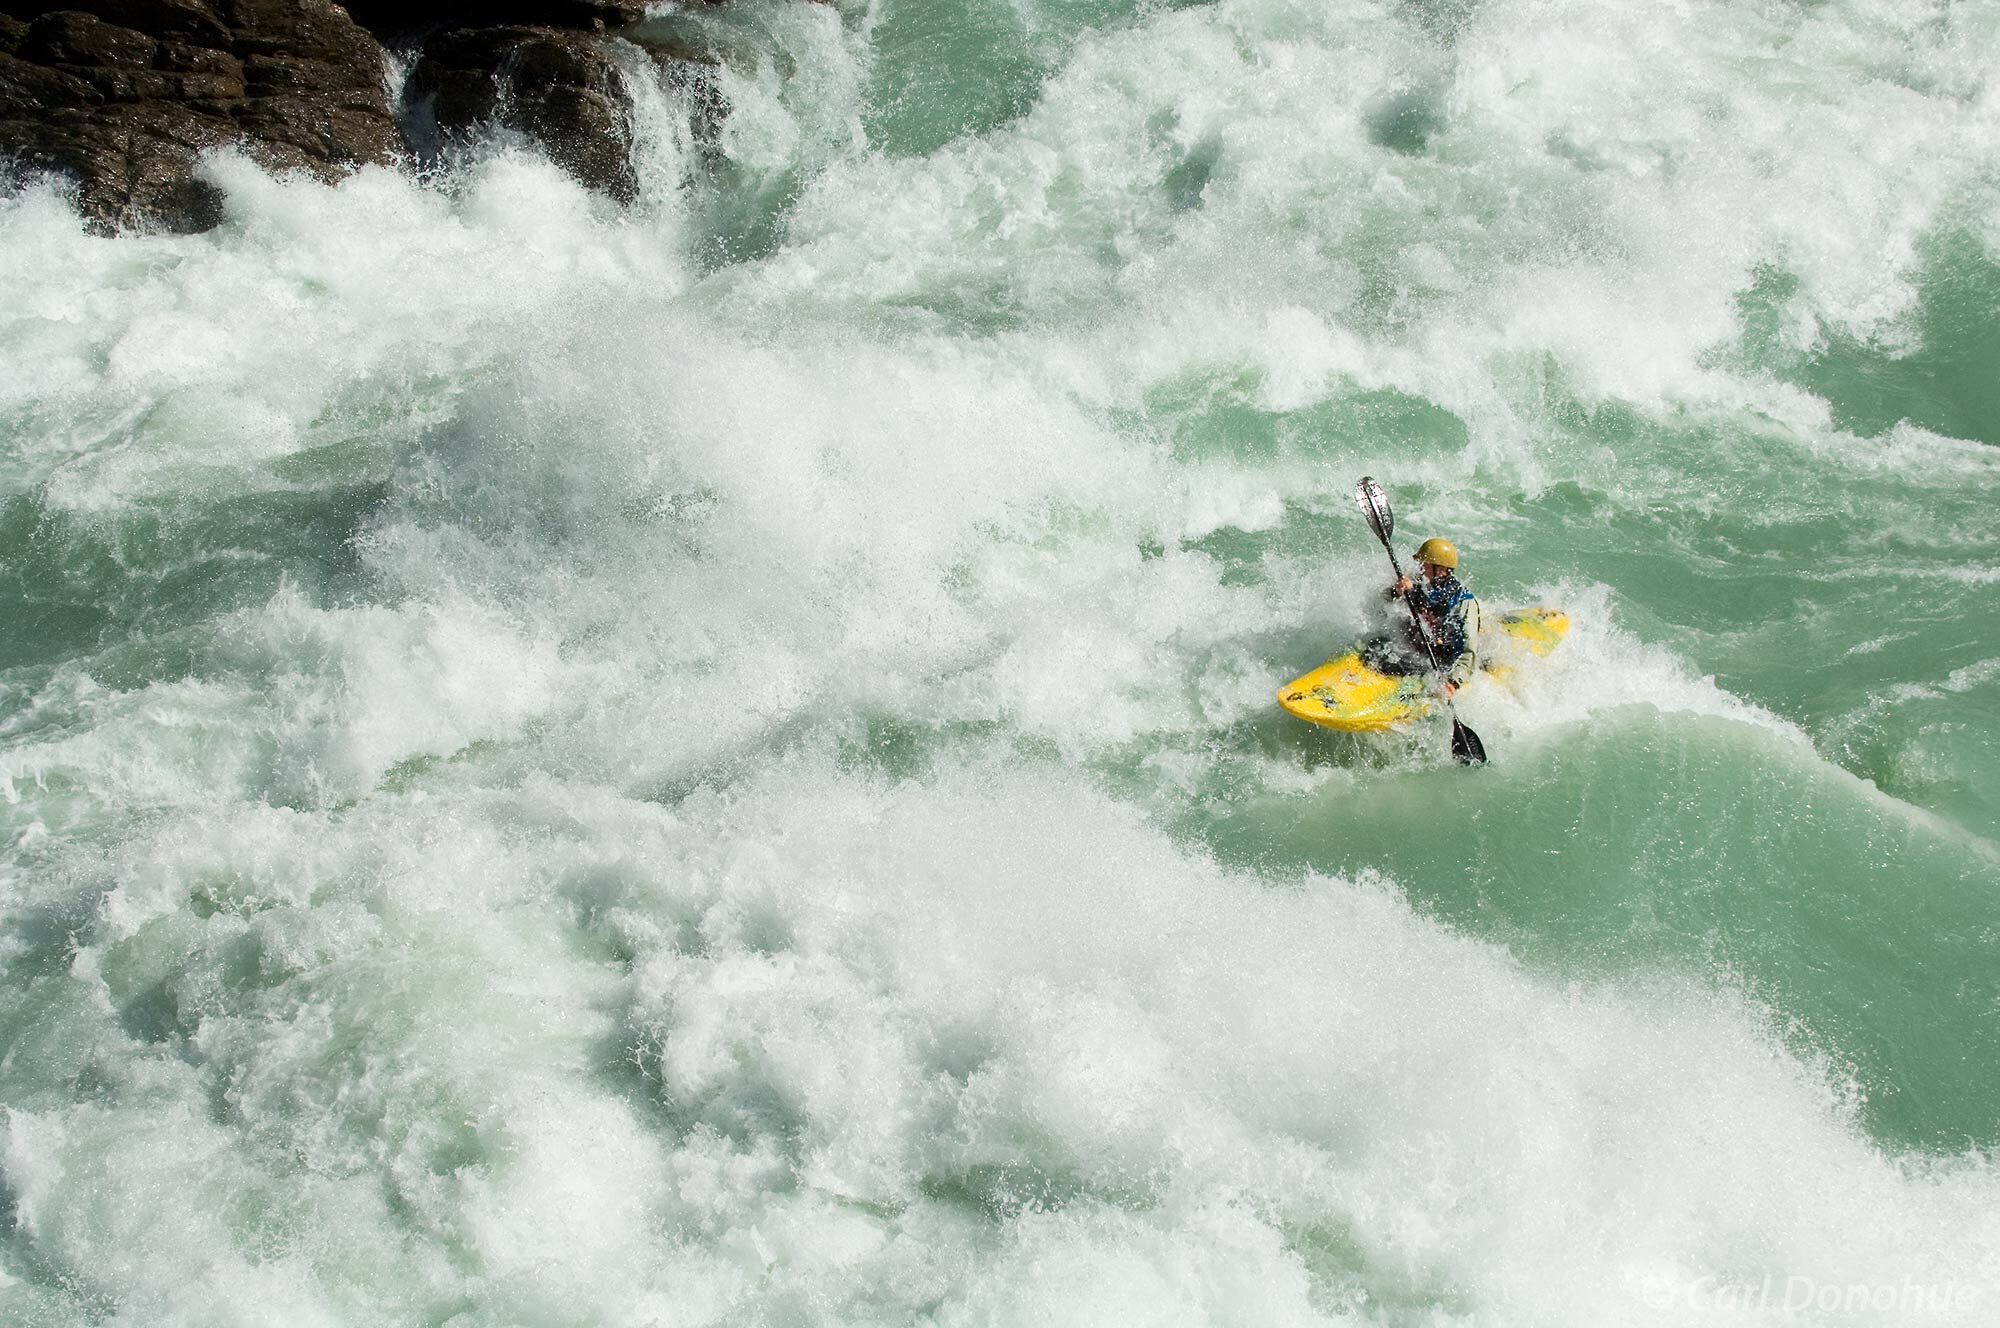 Whitewater kayaking on the Baker River. This huge river dwarfs a kayak in this narrow canyon. Whitewater kayaking, Baker River...